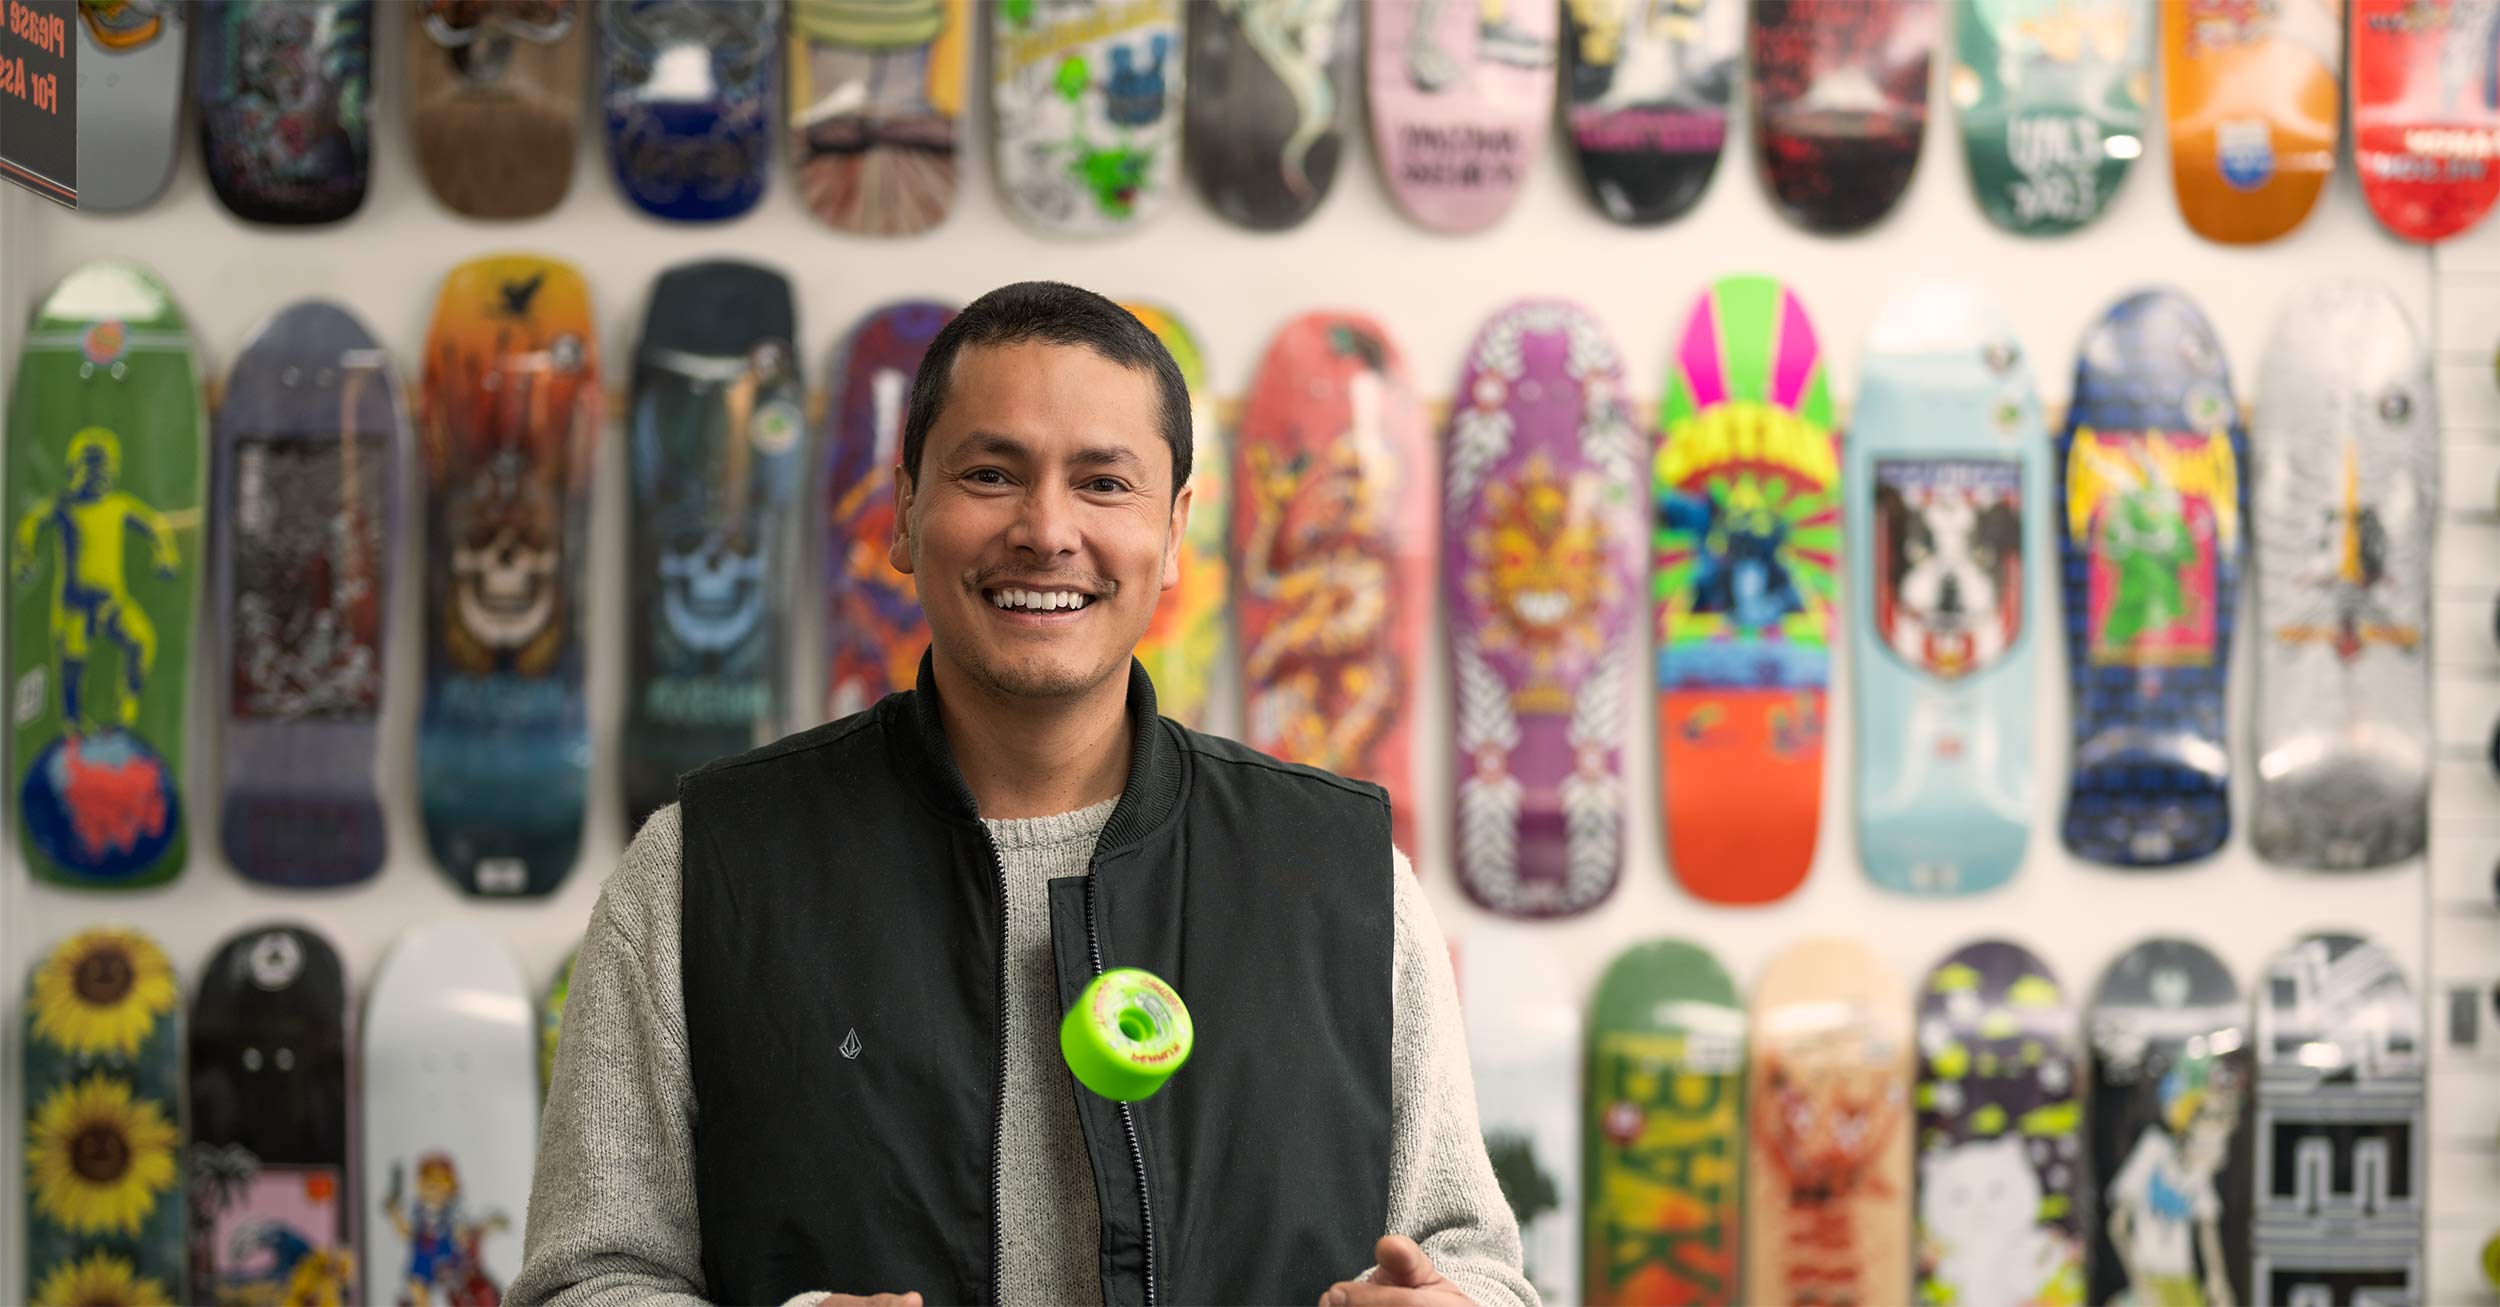 A man smiles at the camera while standing in front of a shop wall covered with skateboards.